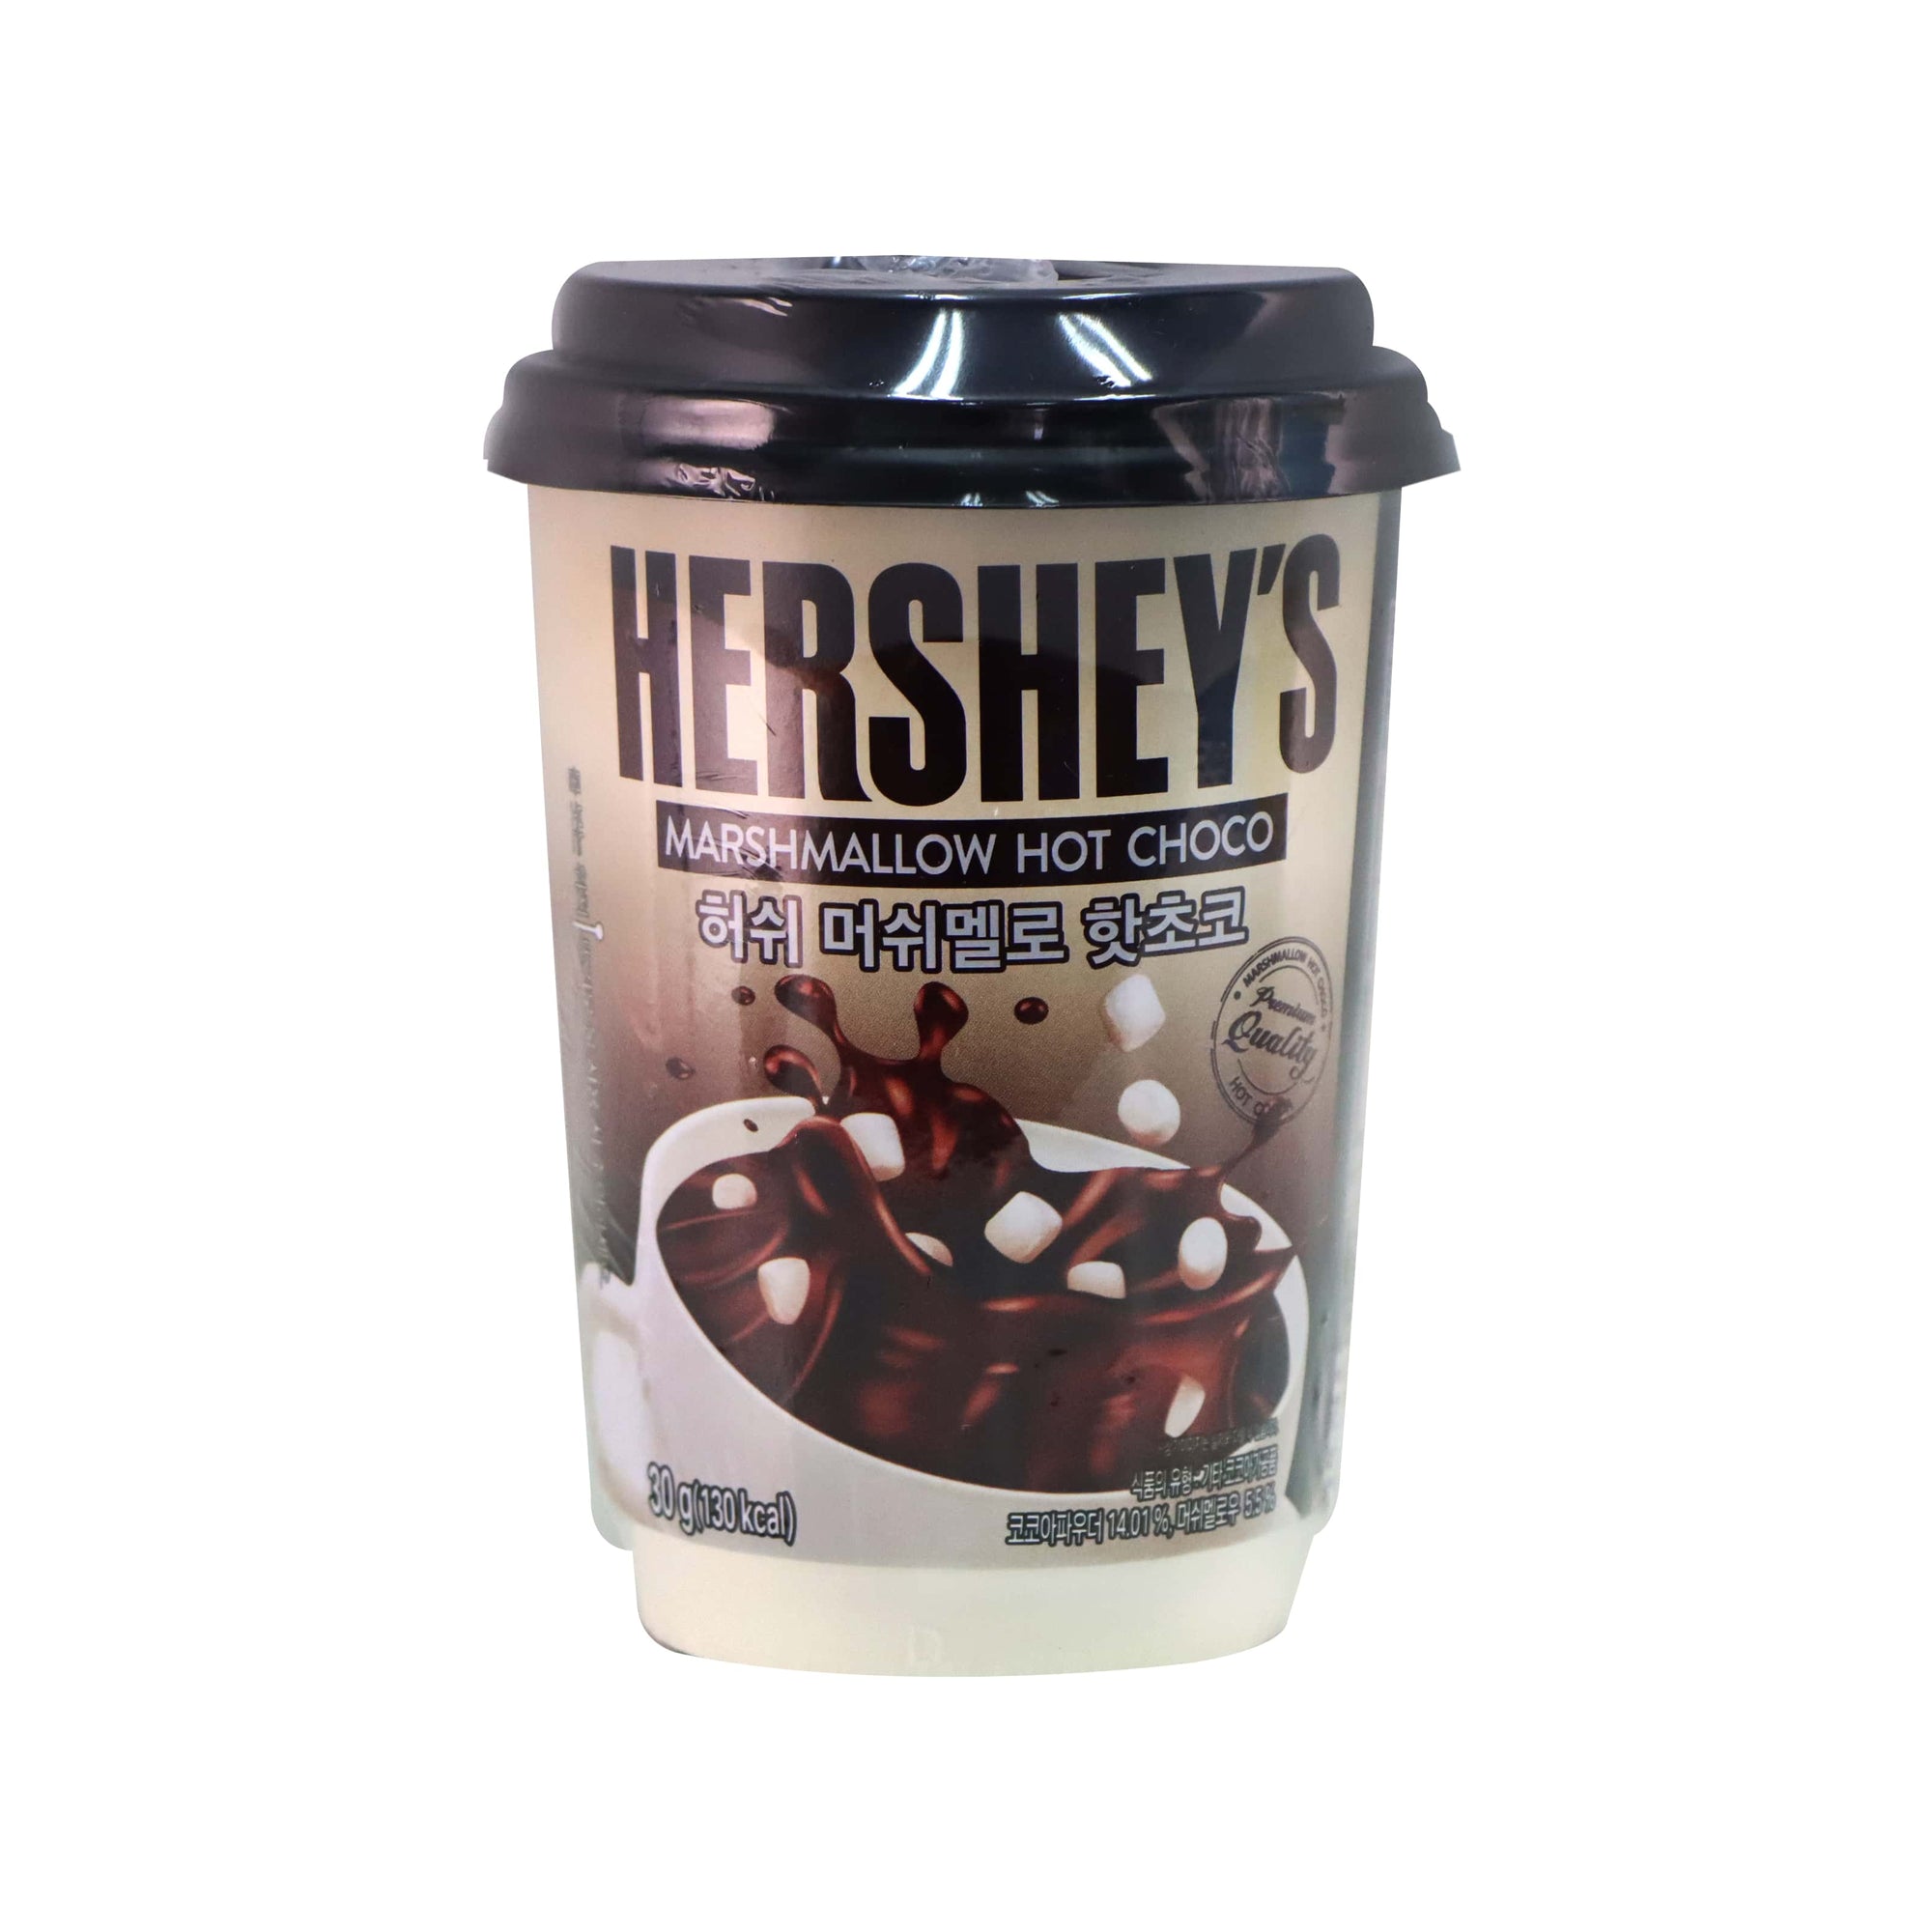 HERSHEY'S Marshmallow Hot Chocolate Cup 30g